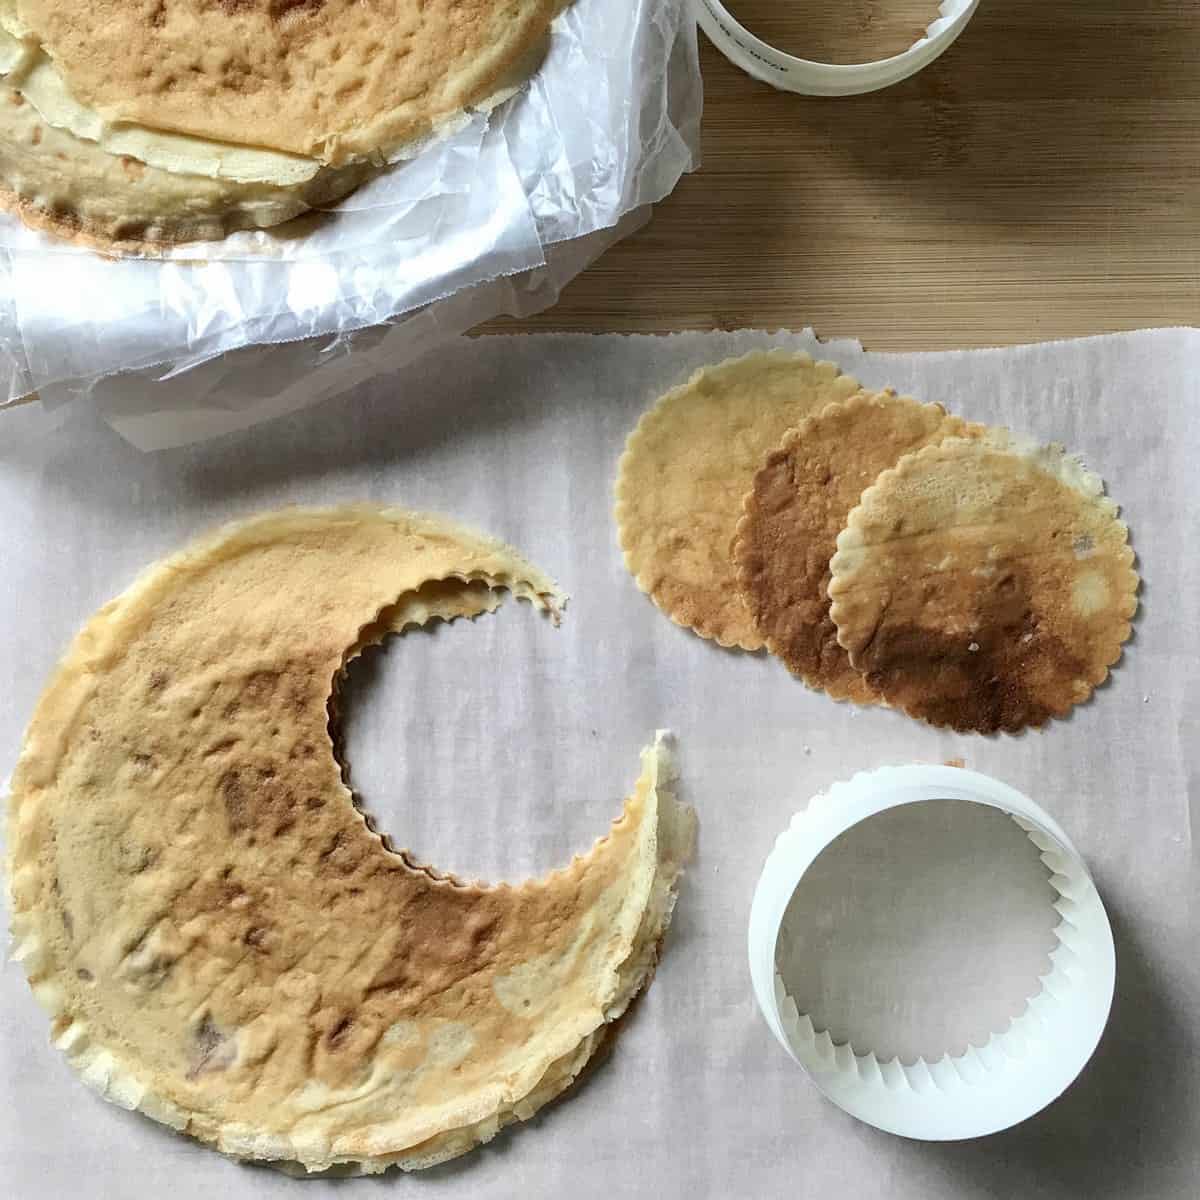 A cookie cutter and crepes on parchment paper.